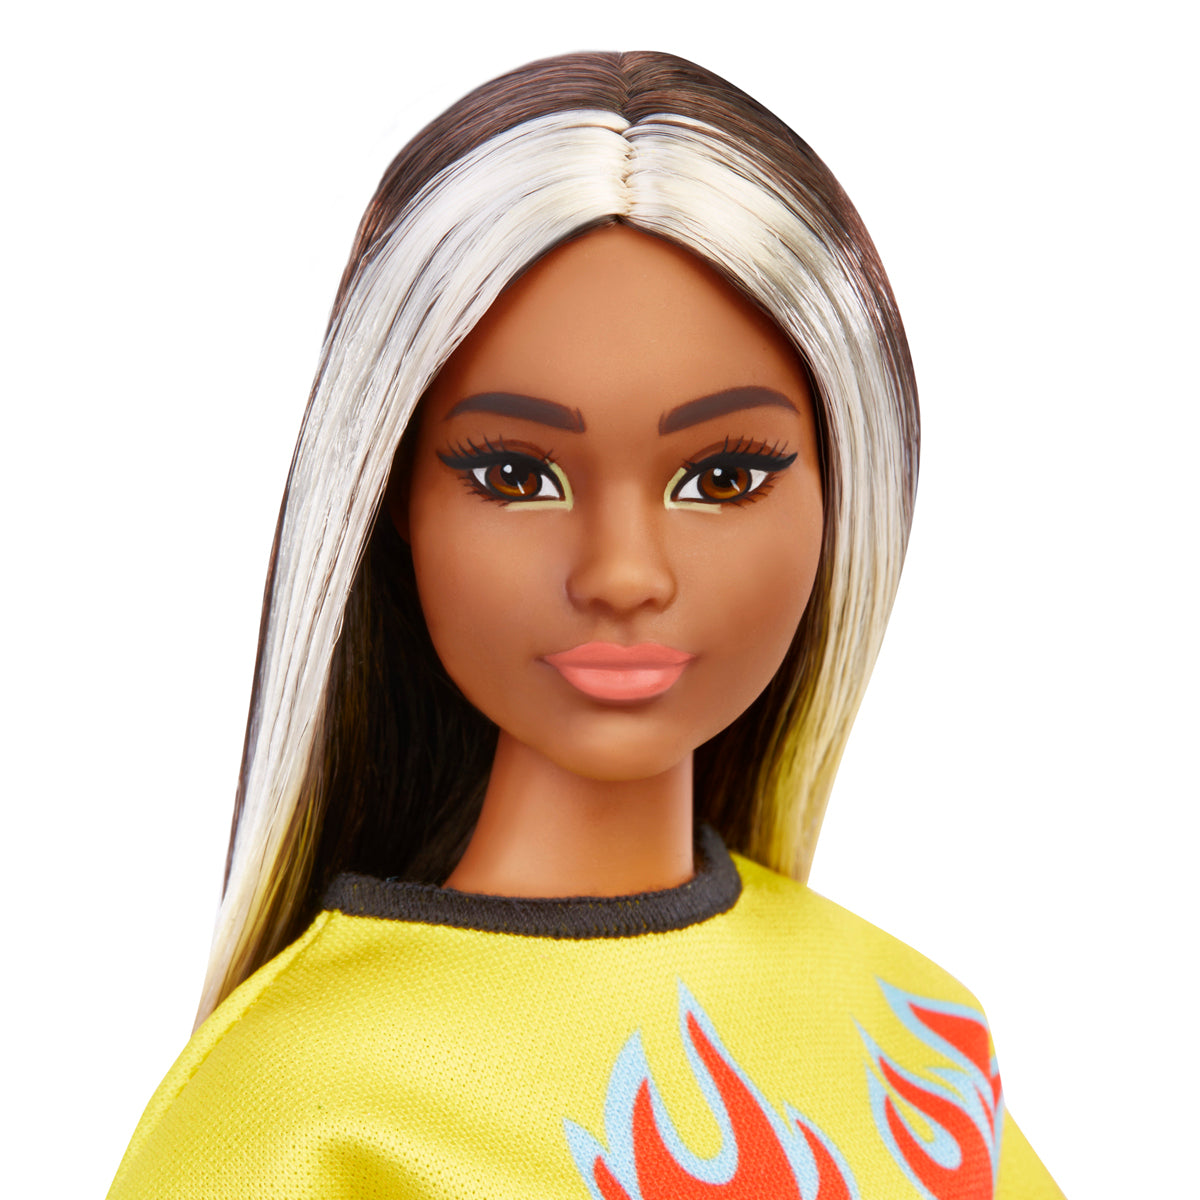 Barbie Fashionistas Doll - Flame Crop Top and Checkered Skirt